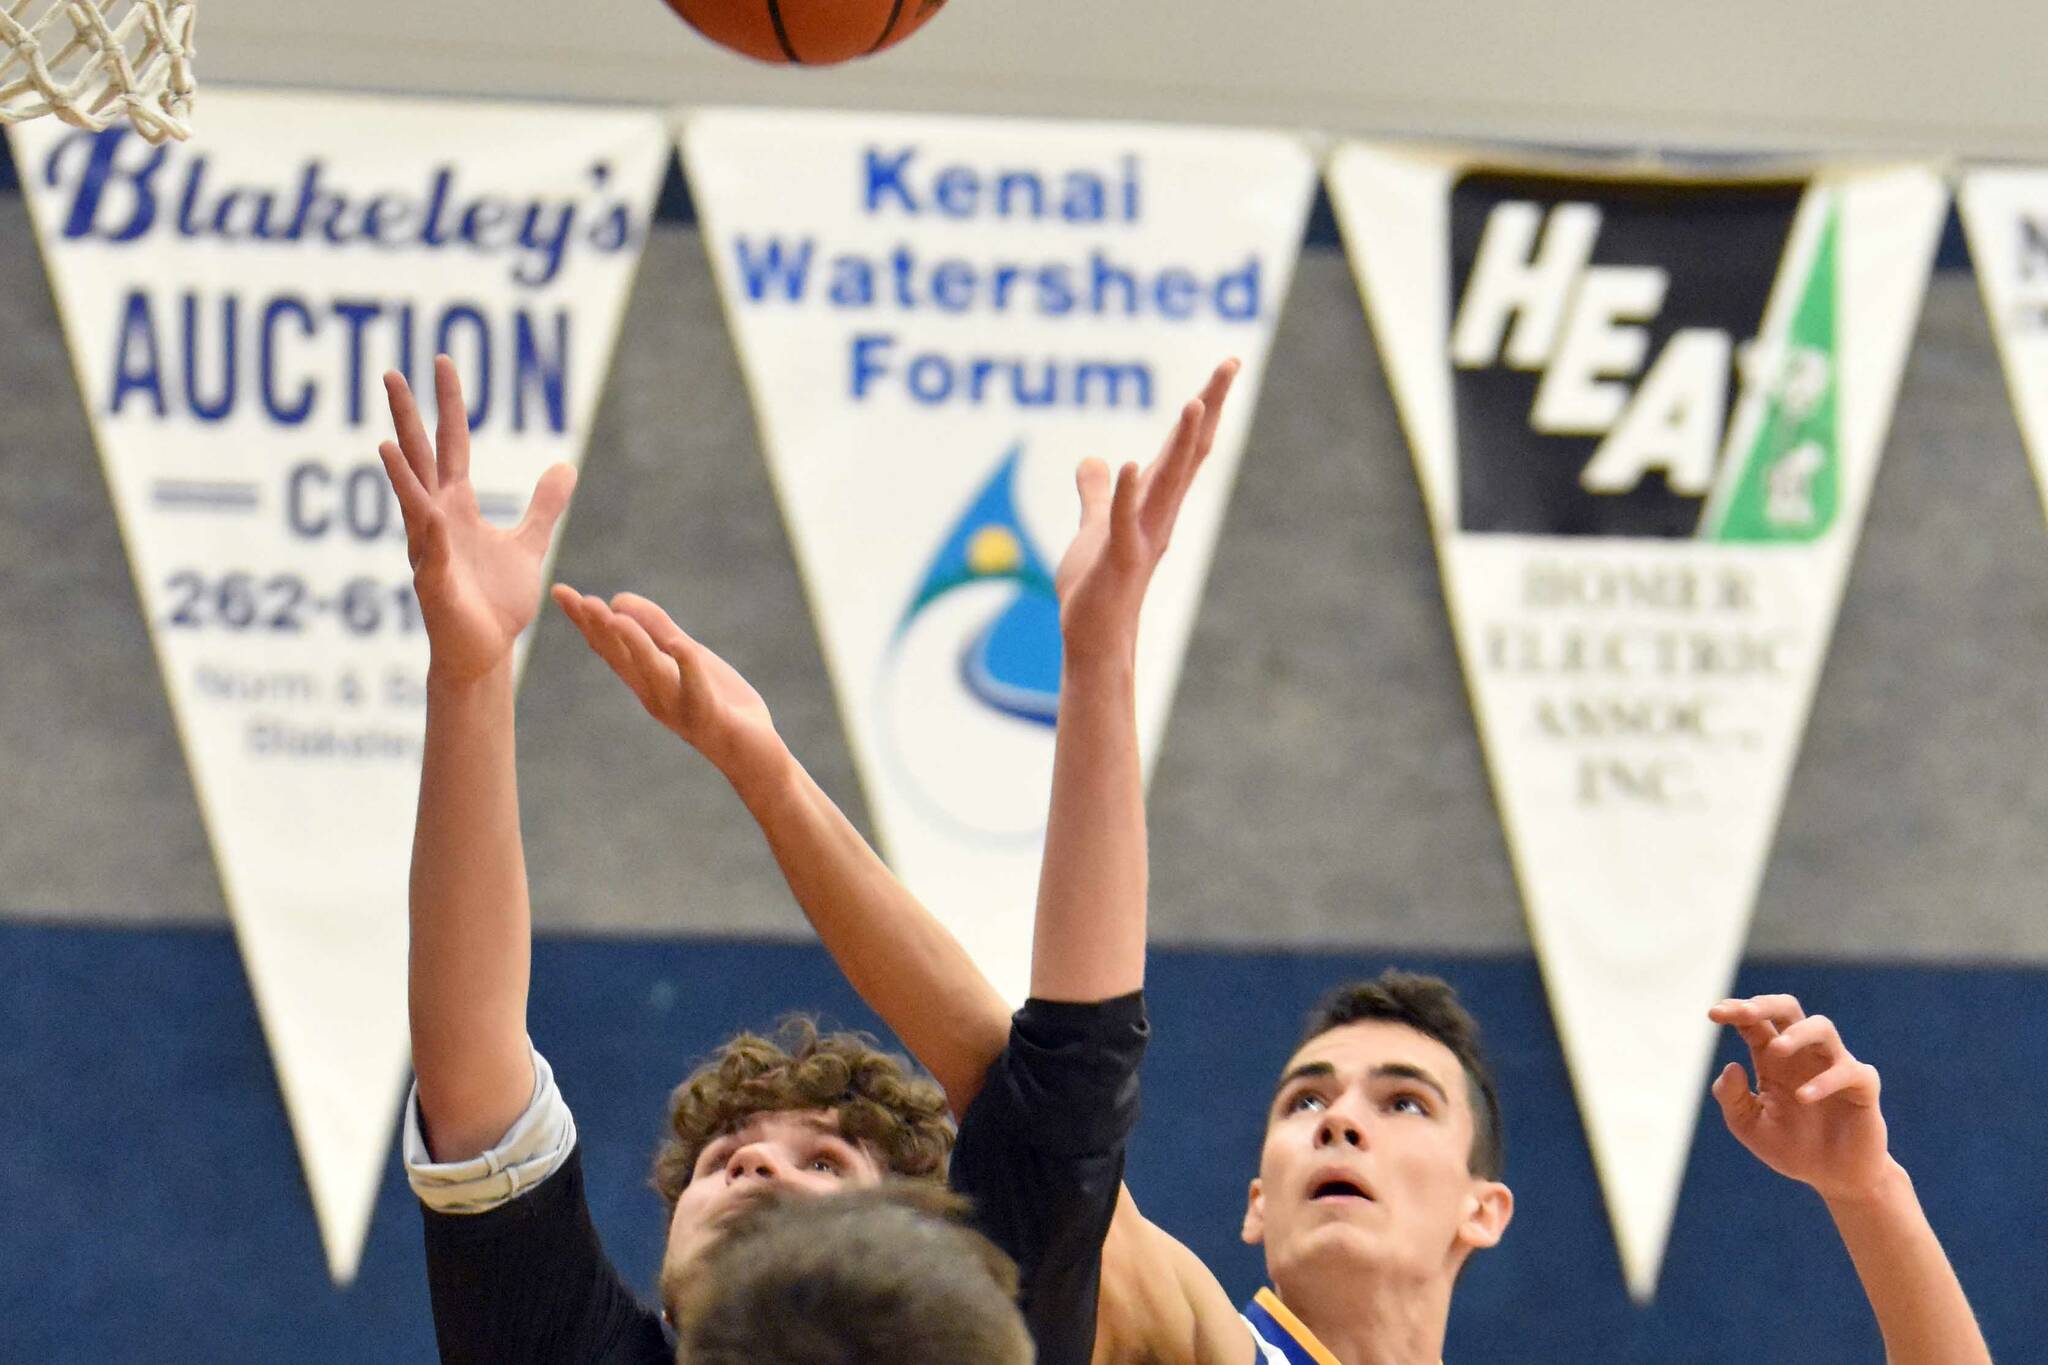 Cook Inlet Academy junior Ian McGarry battles for a rebound against Birchwood Christian on Saturday, Jan. 21, 2023, at Cook Inlet Academy just outside of Soldotna, Alaska. (Photo by Jeff Helminiak/Peninsula Clarion)